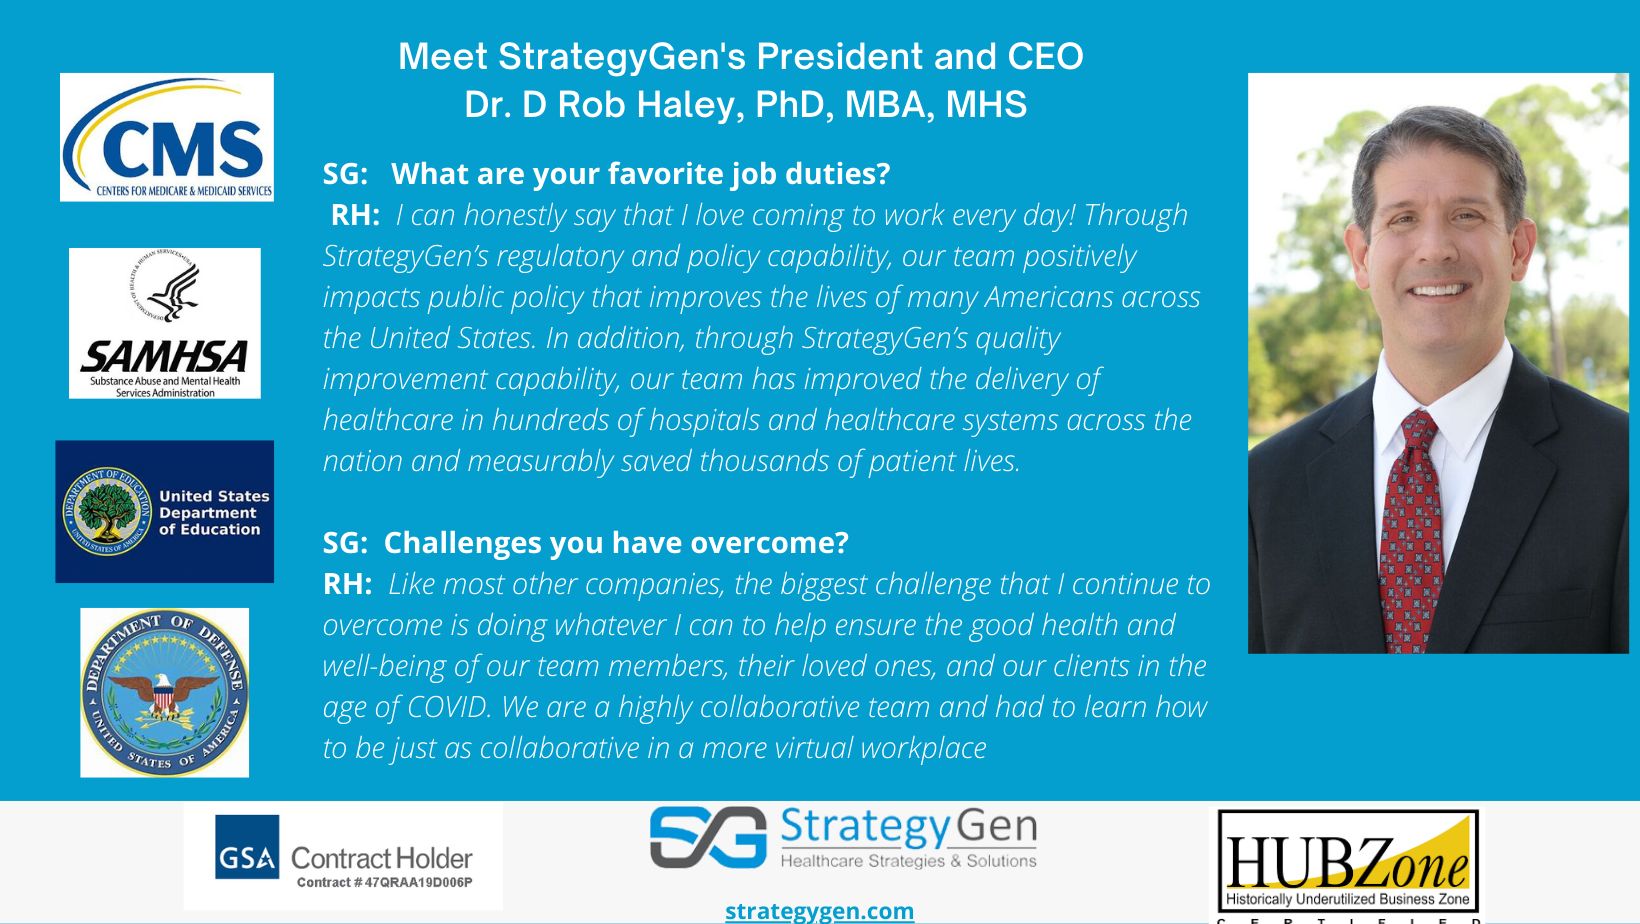 Dr. Rob Haley, StrategyGen's President and CEO - StrategyGen Co